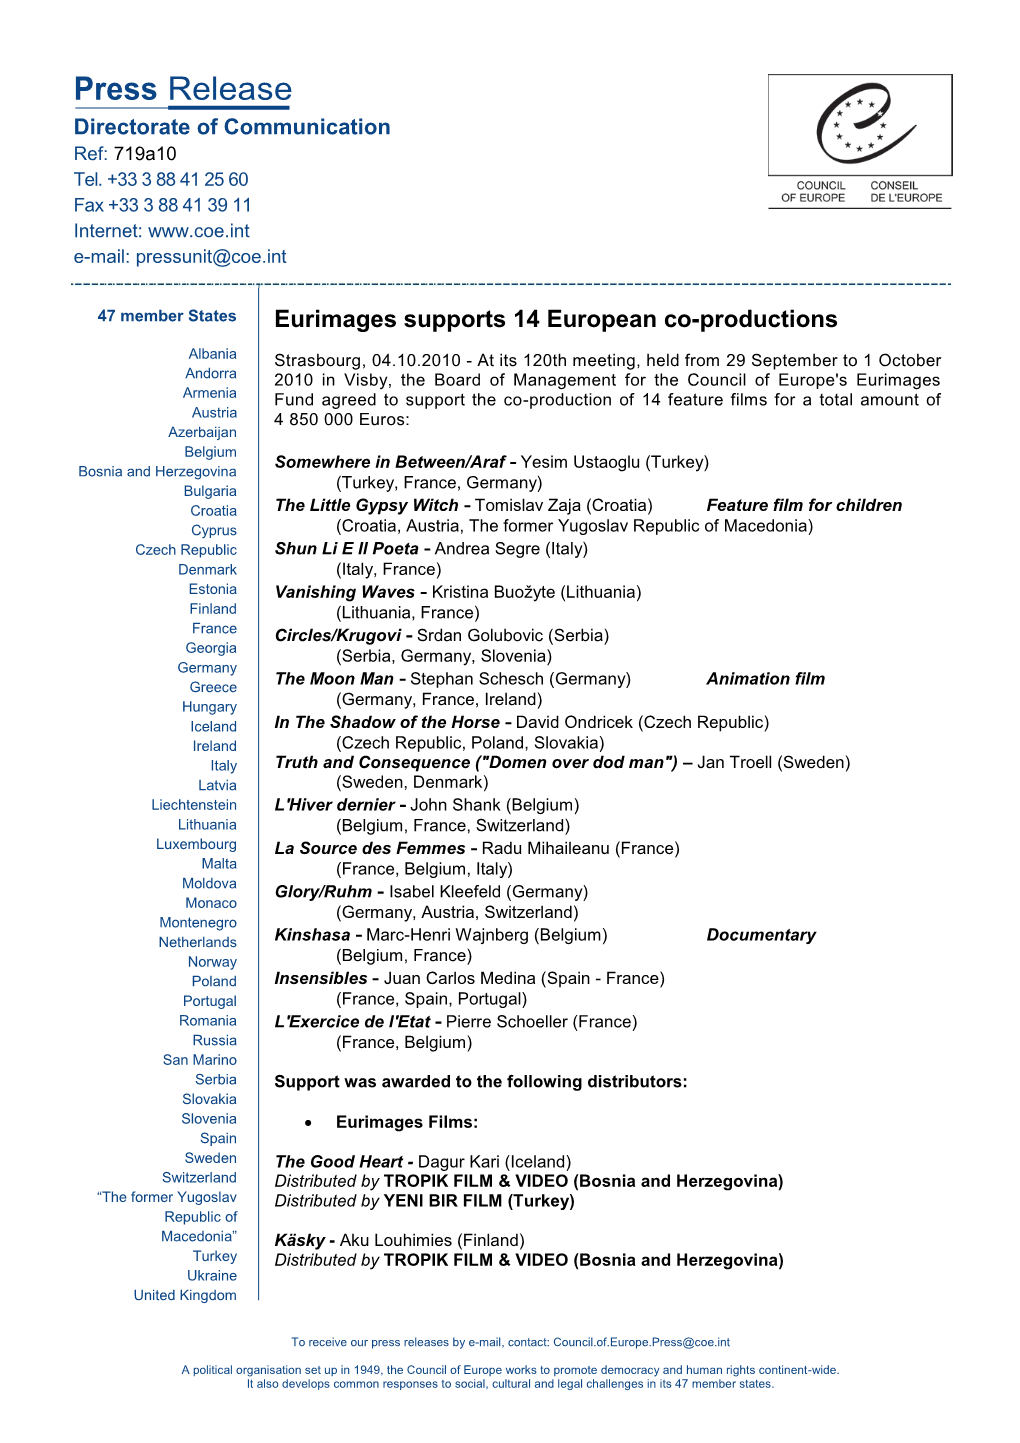 Eurimages Supports 14 European Co-Productions